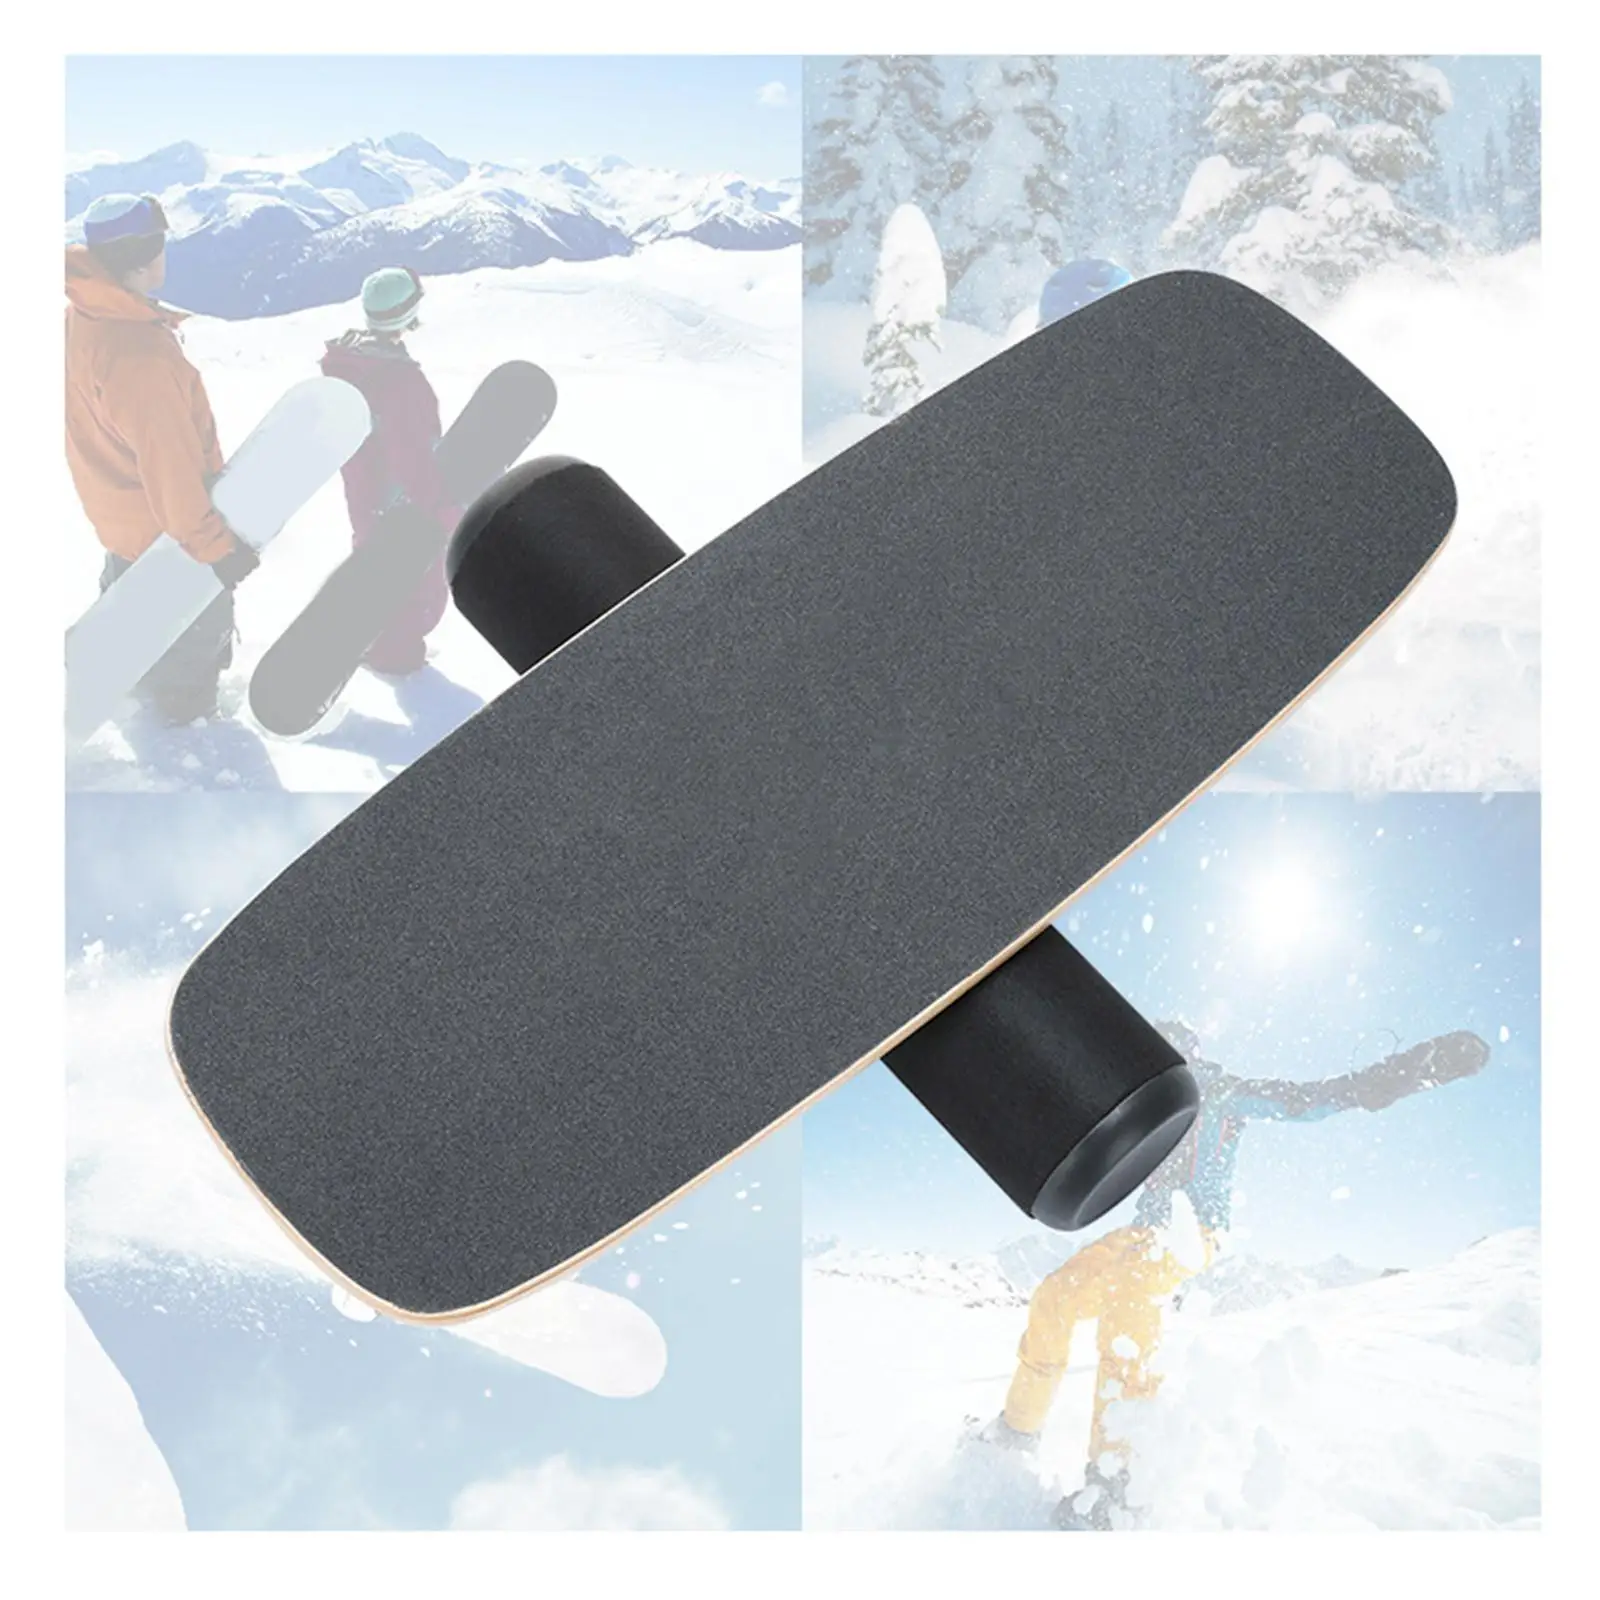 Balance Board Trainer Exercise Equipment Core Strength Balance Training Stability Roller Gym Balancing Board for Snowboard